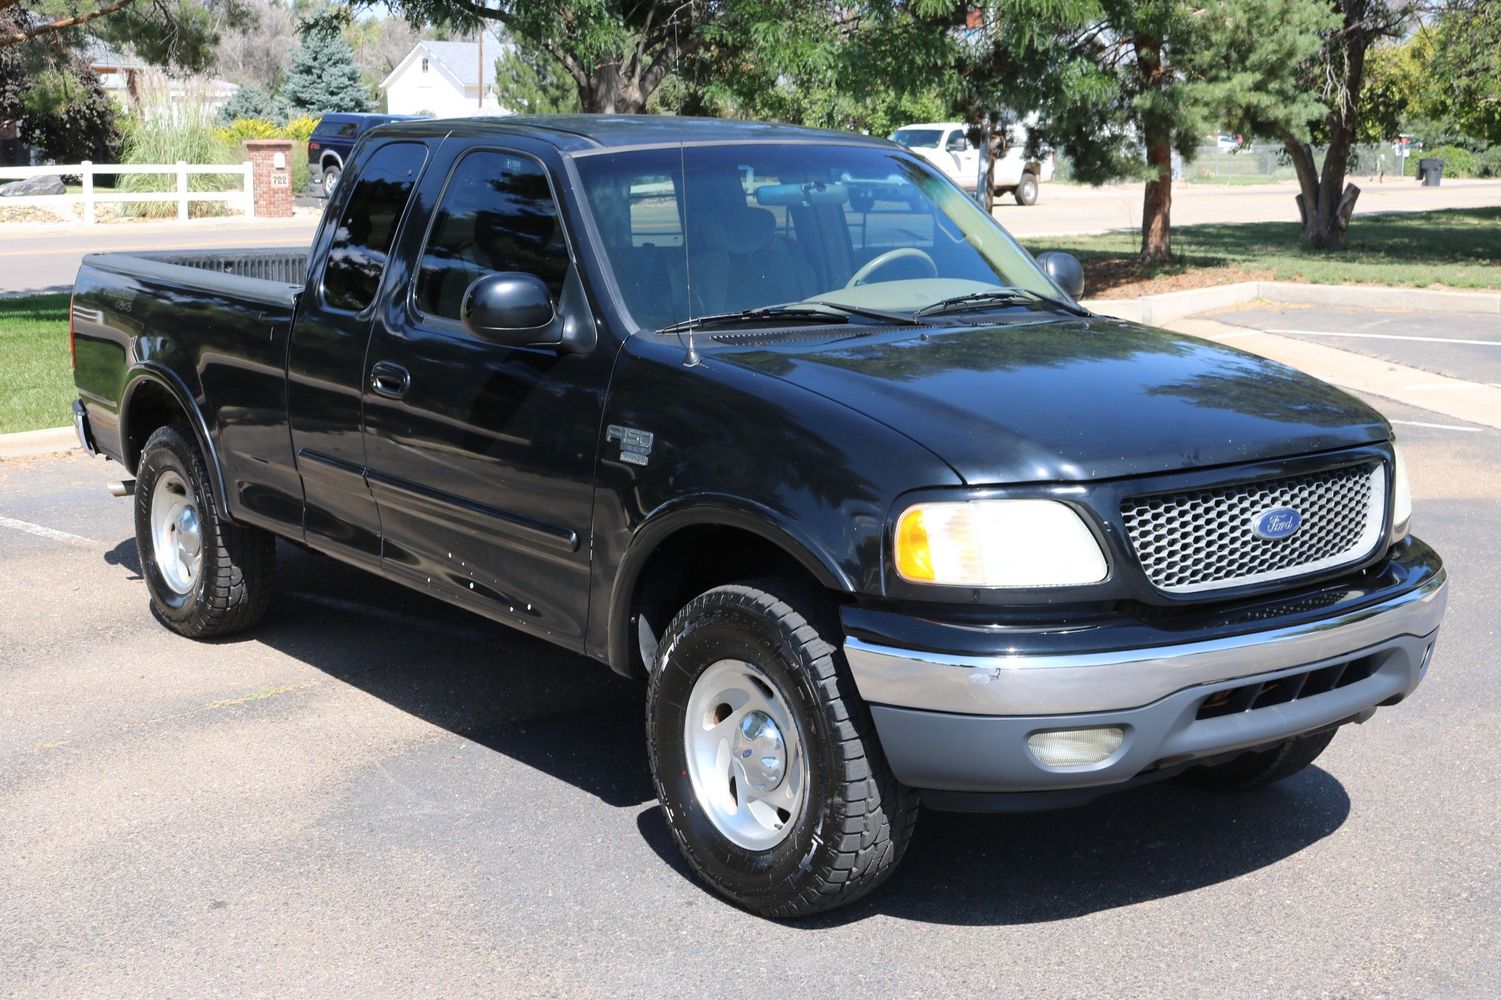 2001 Ford F-150 XLT | Victory Motors of Colorado 2001 Ford F 150 Xlt 7700 Towing Capacity